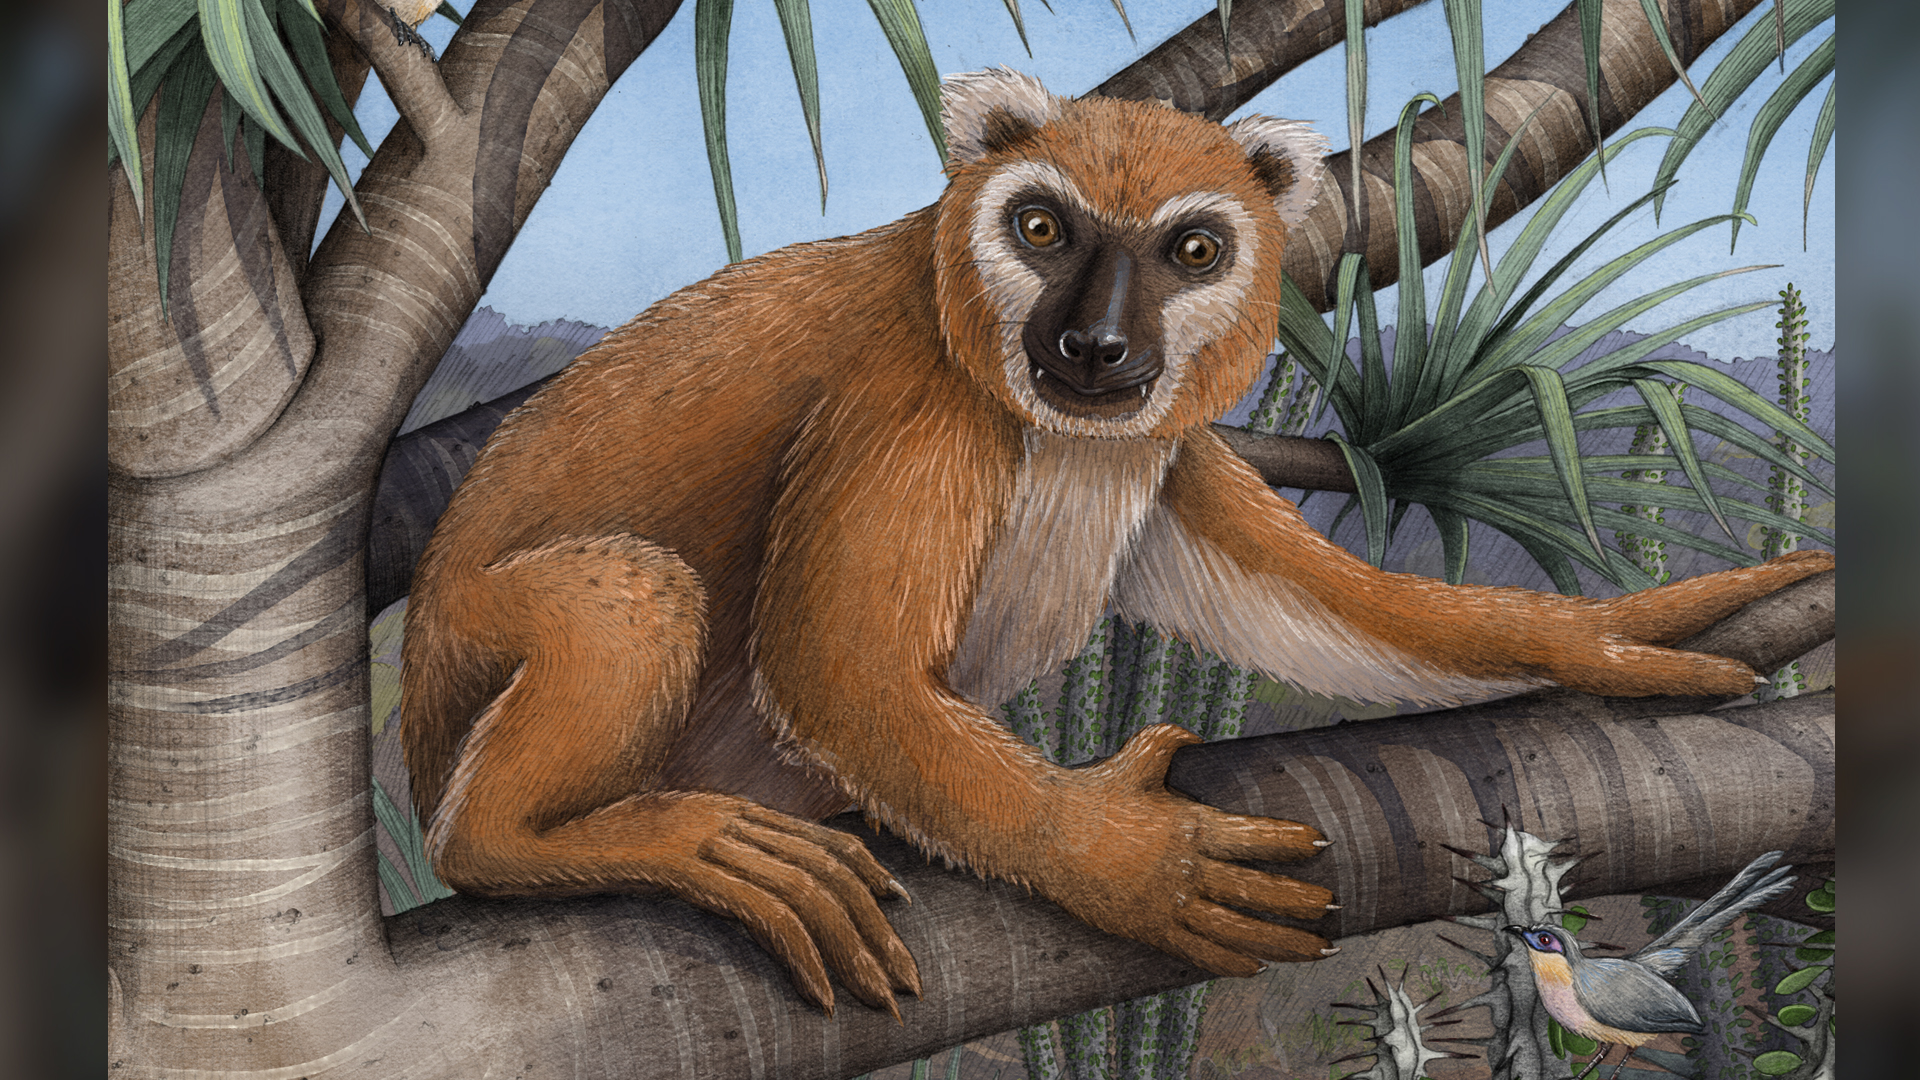 This enormous, leaf-eating lemur was the scale of a human with the paws of a koala